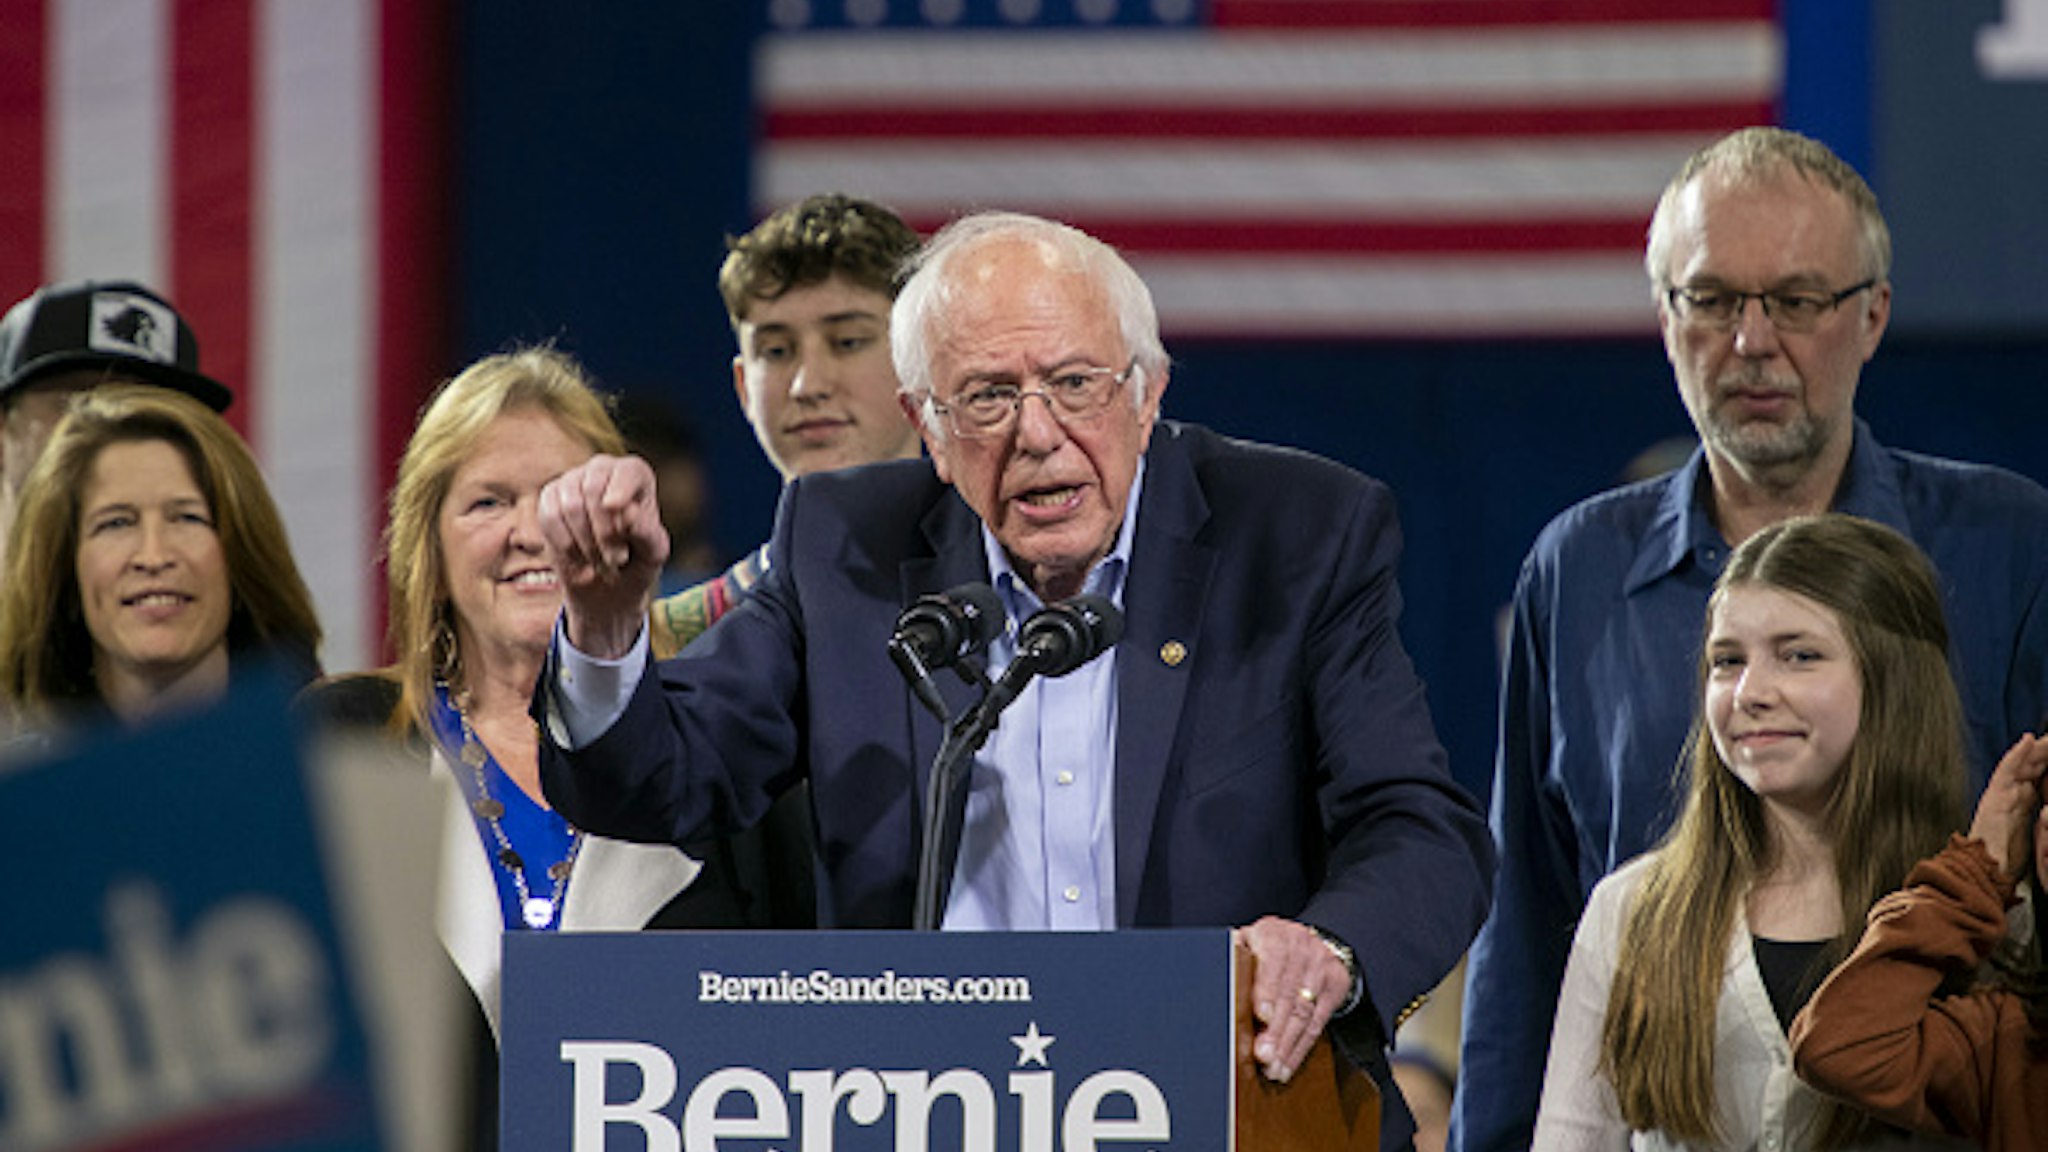 Senator Bernie Sanders, an Independent from Vermont and 2020 presidential candidate, speaks during a primary night rally in Essex Junction, Vermont, U.S., on Tuesday, March 3, 2020. The biggest day of the presidential primary calendar will define the nomination fight for Sanders and Joe Biden and determine whether Michael Bloomberg and Elizabeth Warren have a rationale for carrying on their campaigns.